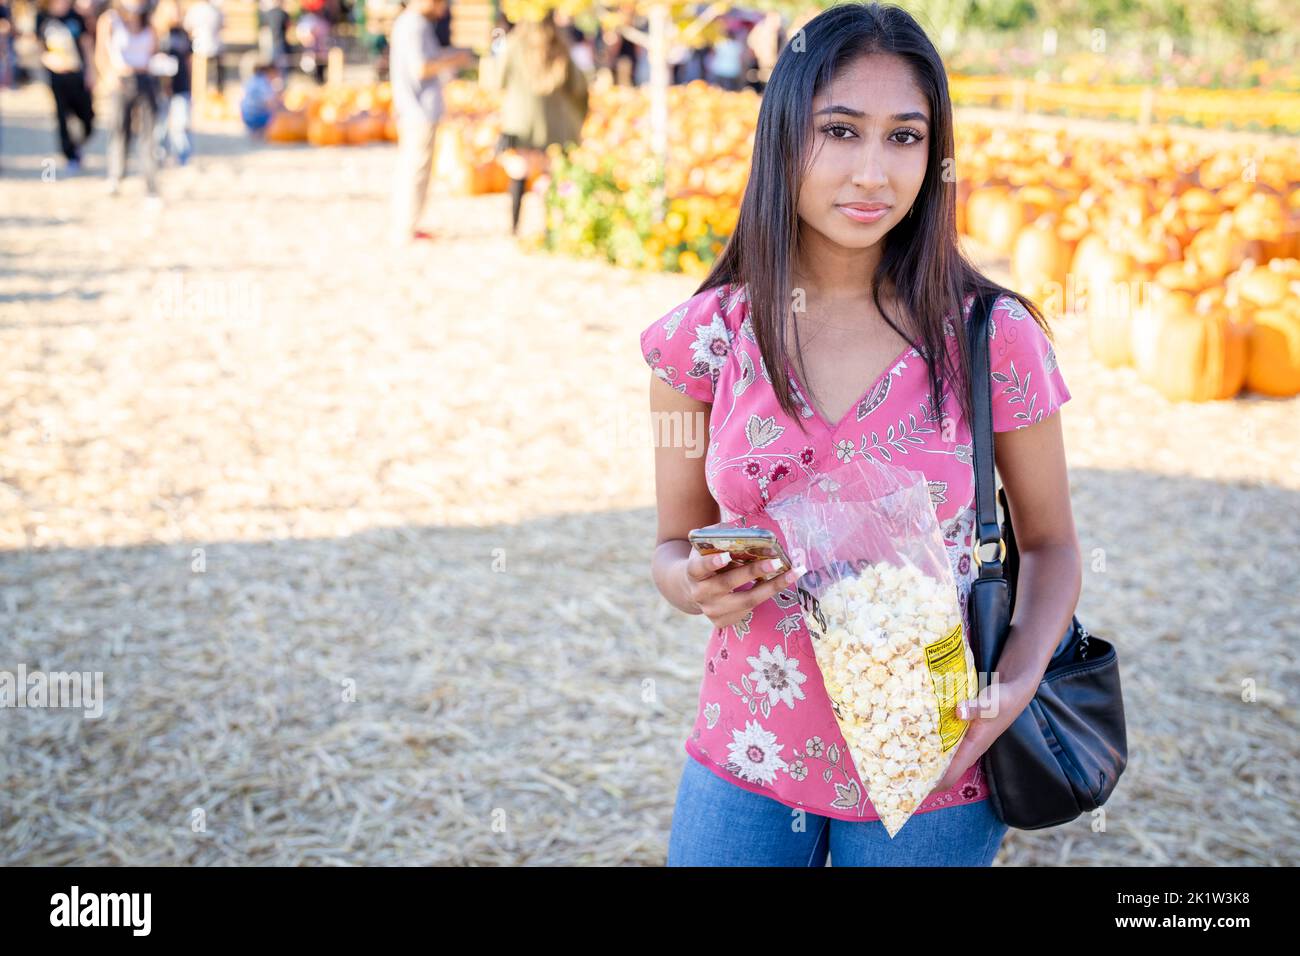 Fall Celebration Portrait of a Young Woman Eating Kettle Corn at a Pumpkin Farm while on Her Smart Phone Stock Photo